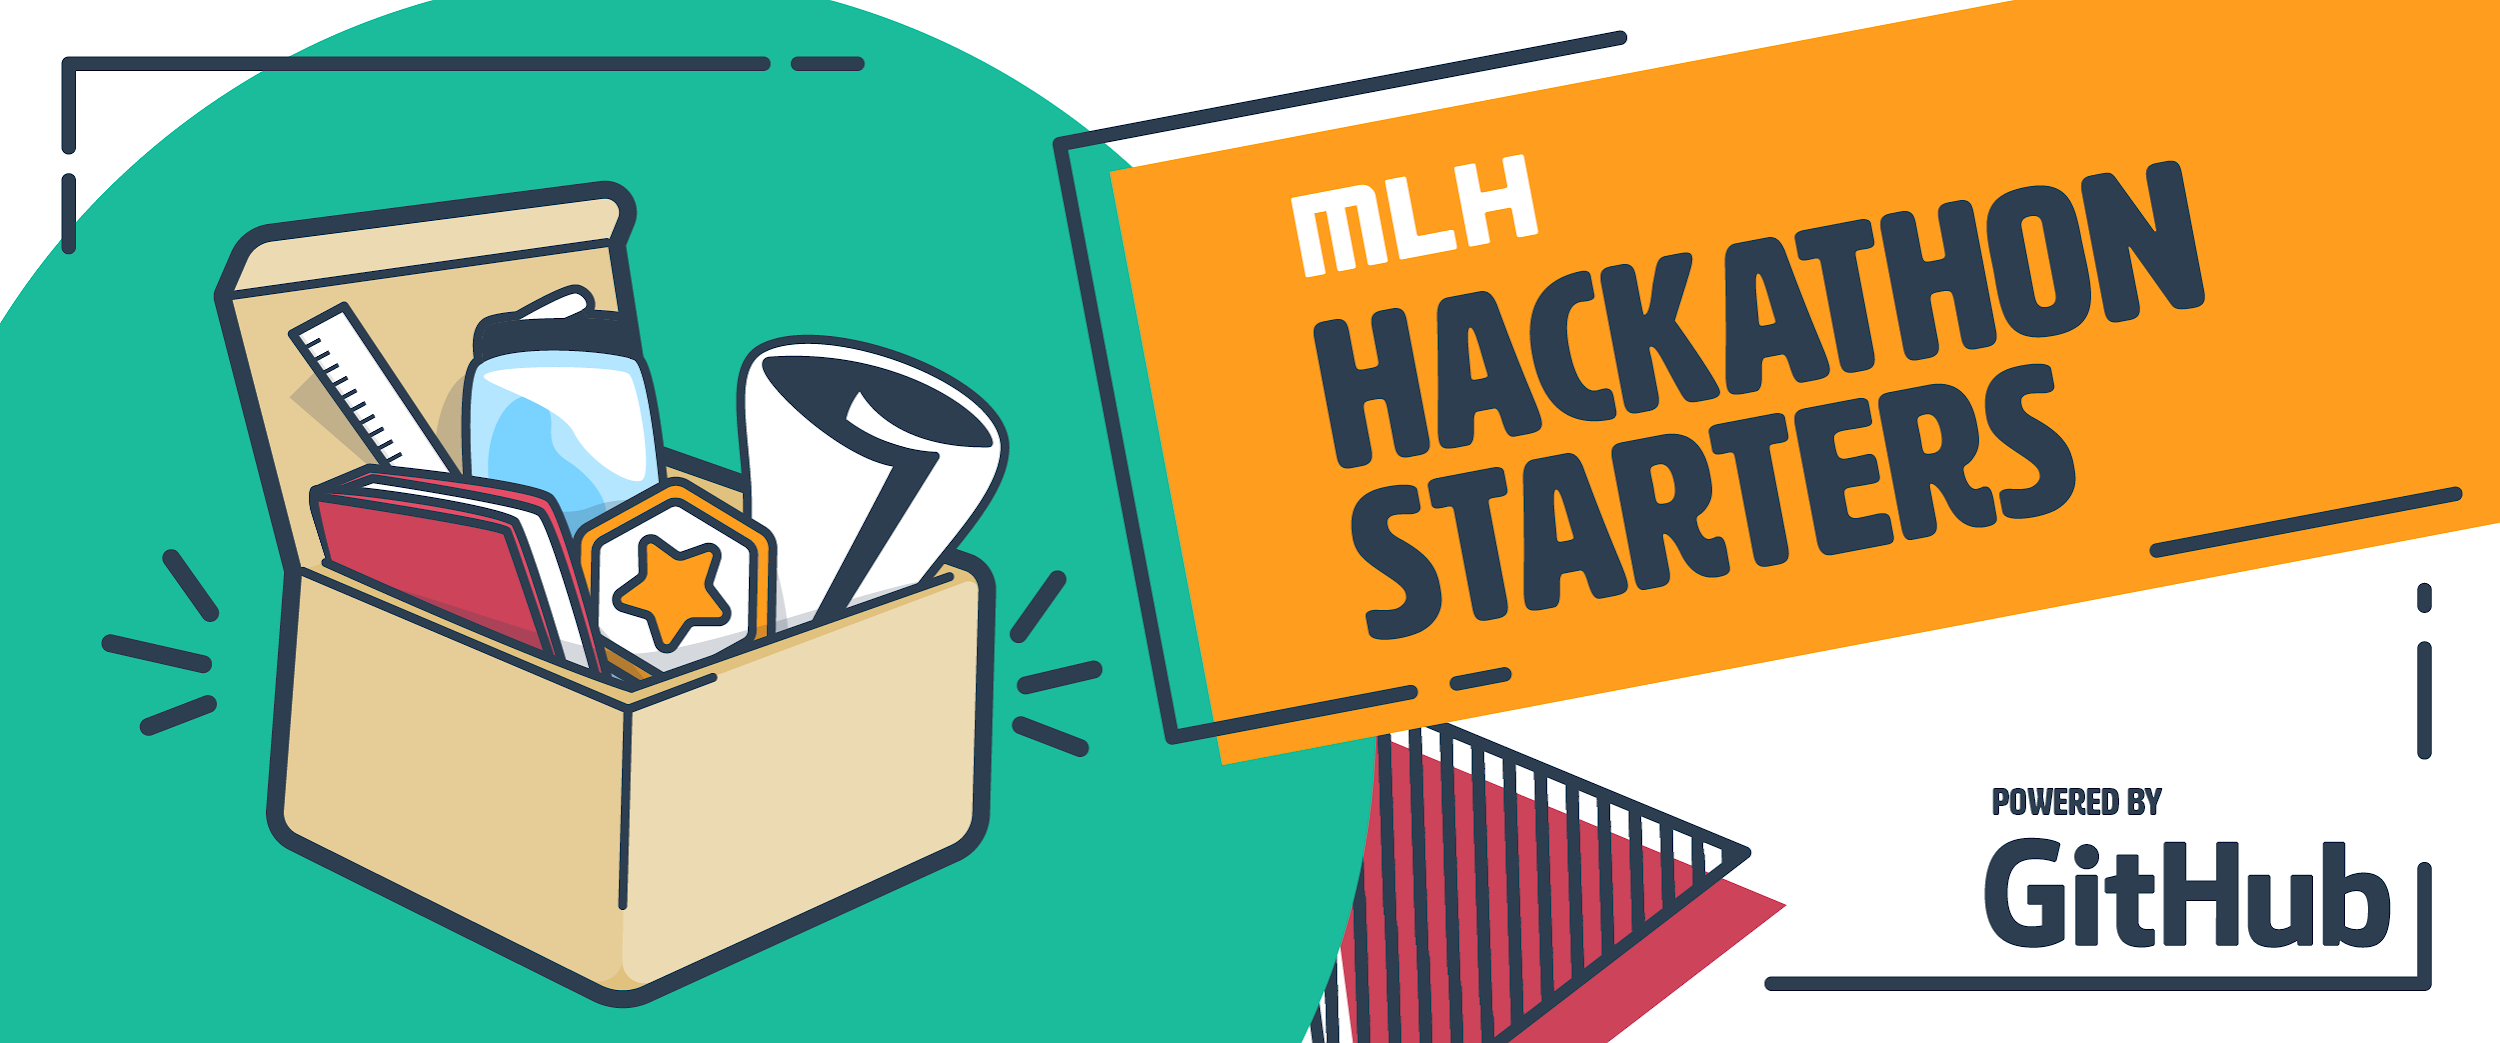 MLH Hackathon Starters, Powered by GitHub